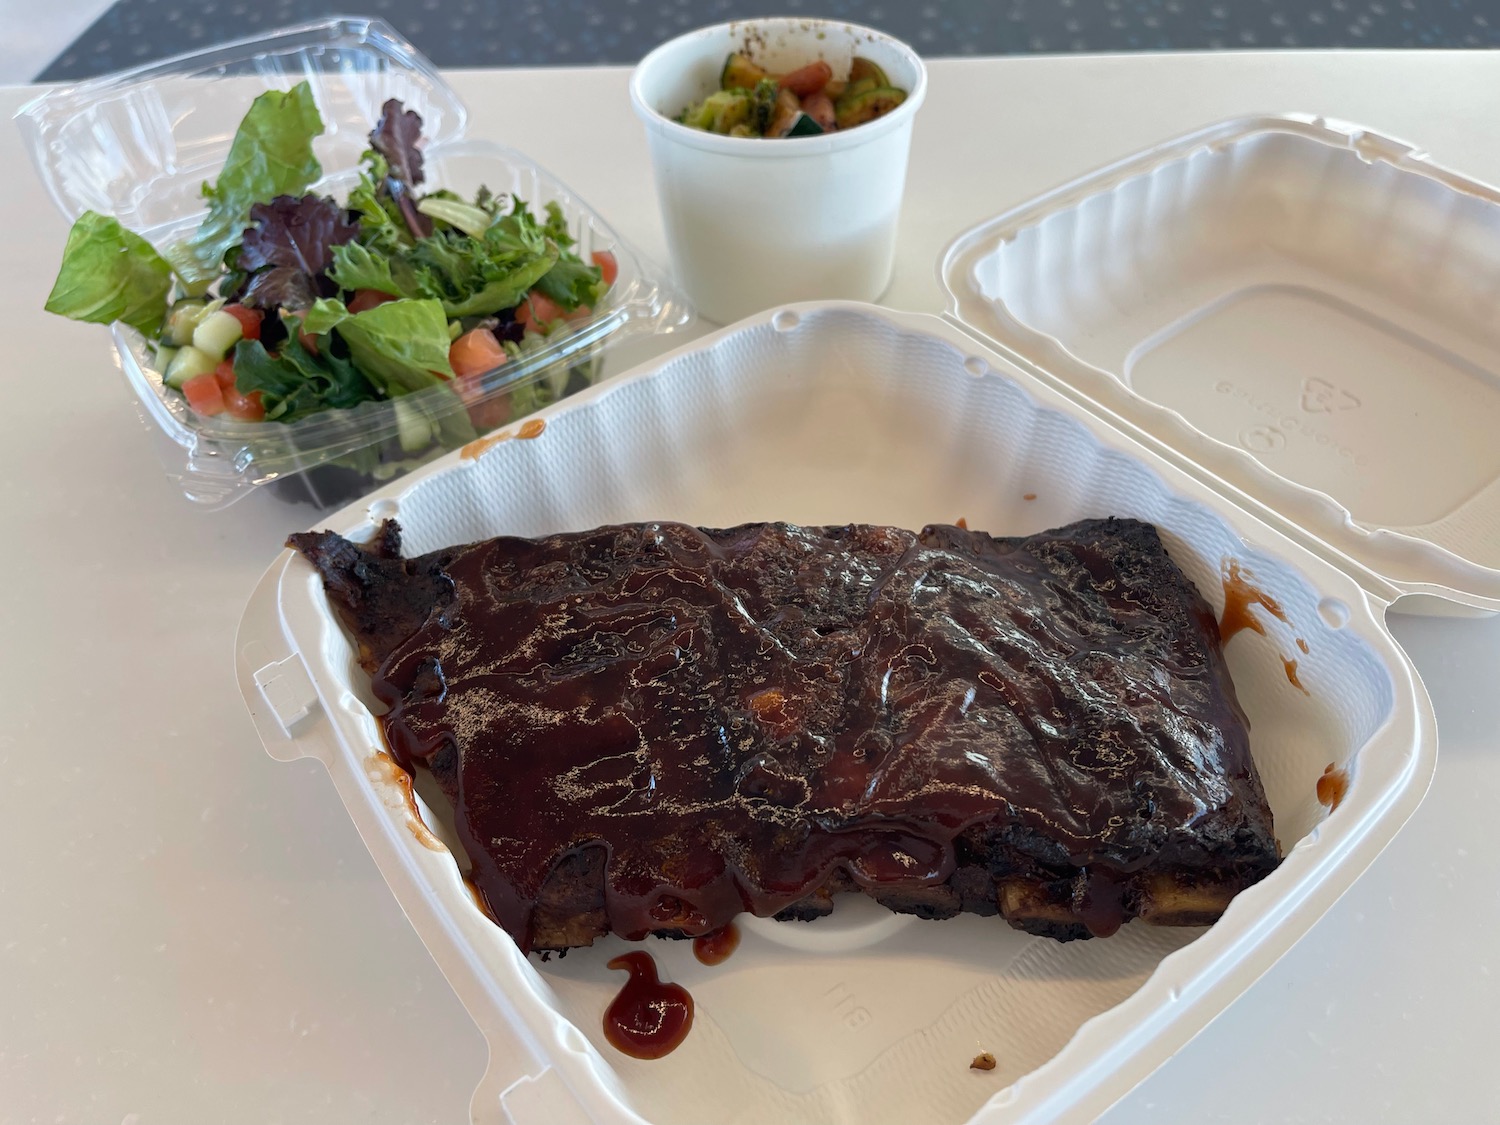 a styrofoam container with ribs and salad